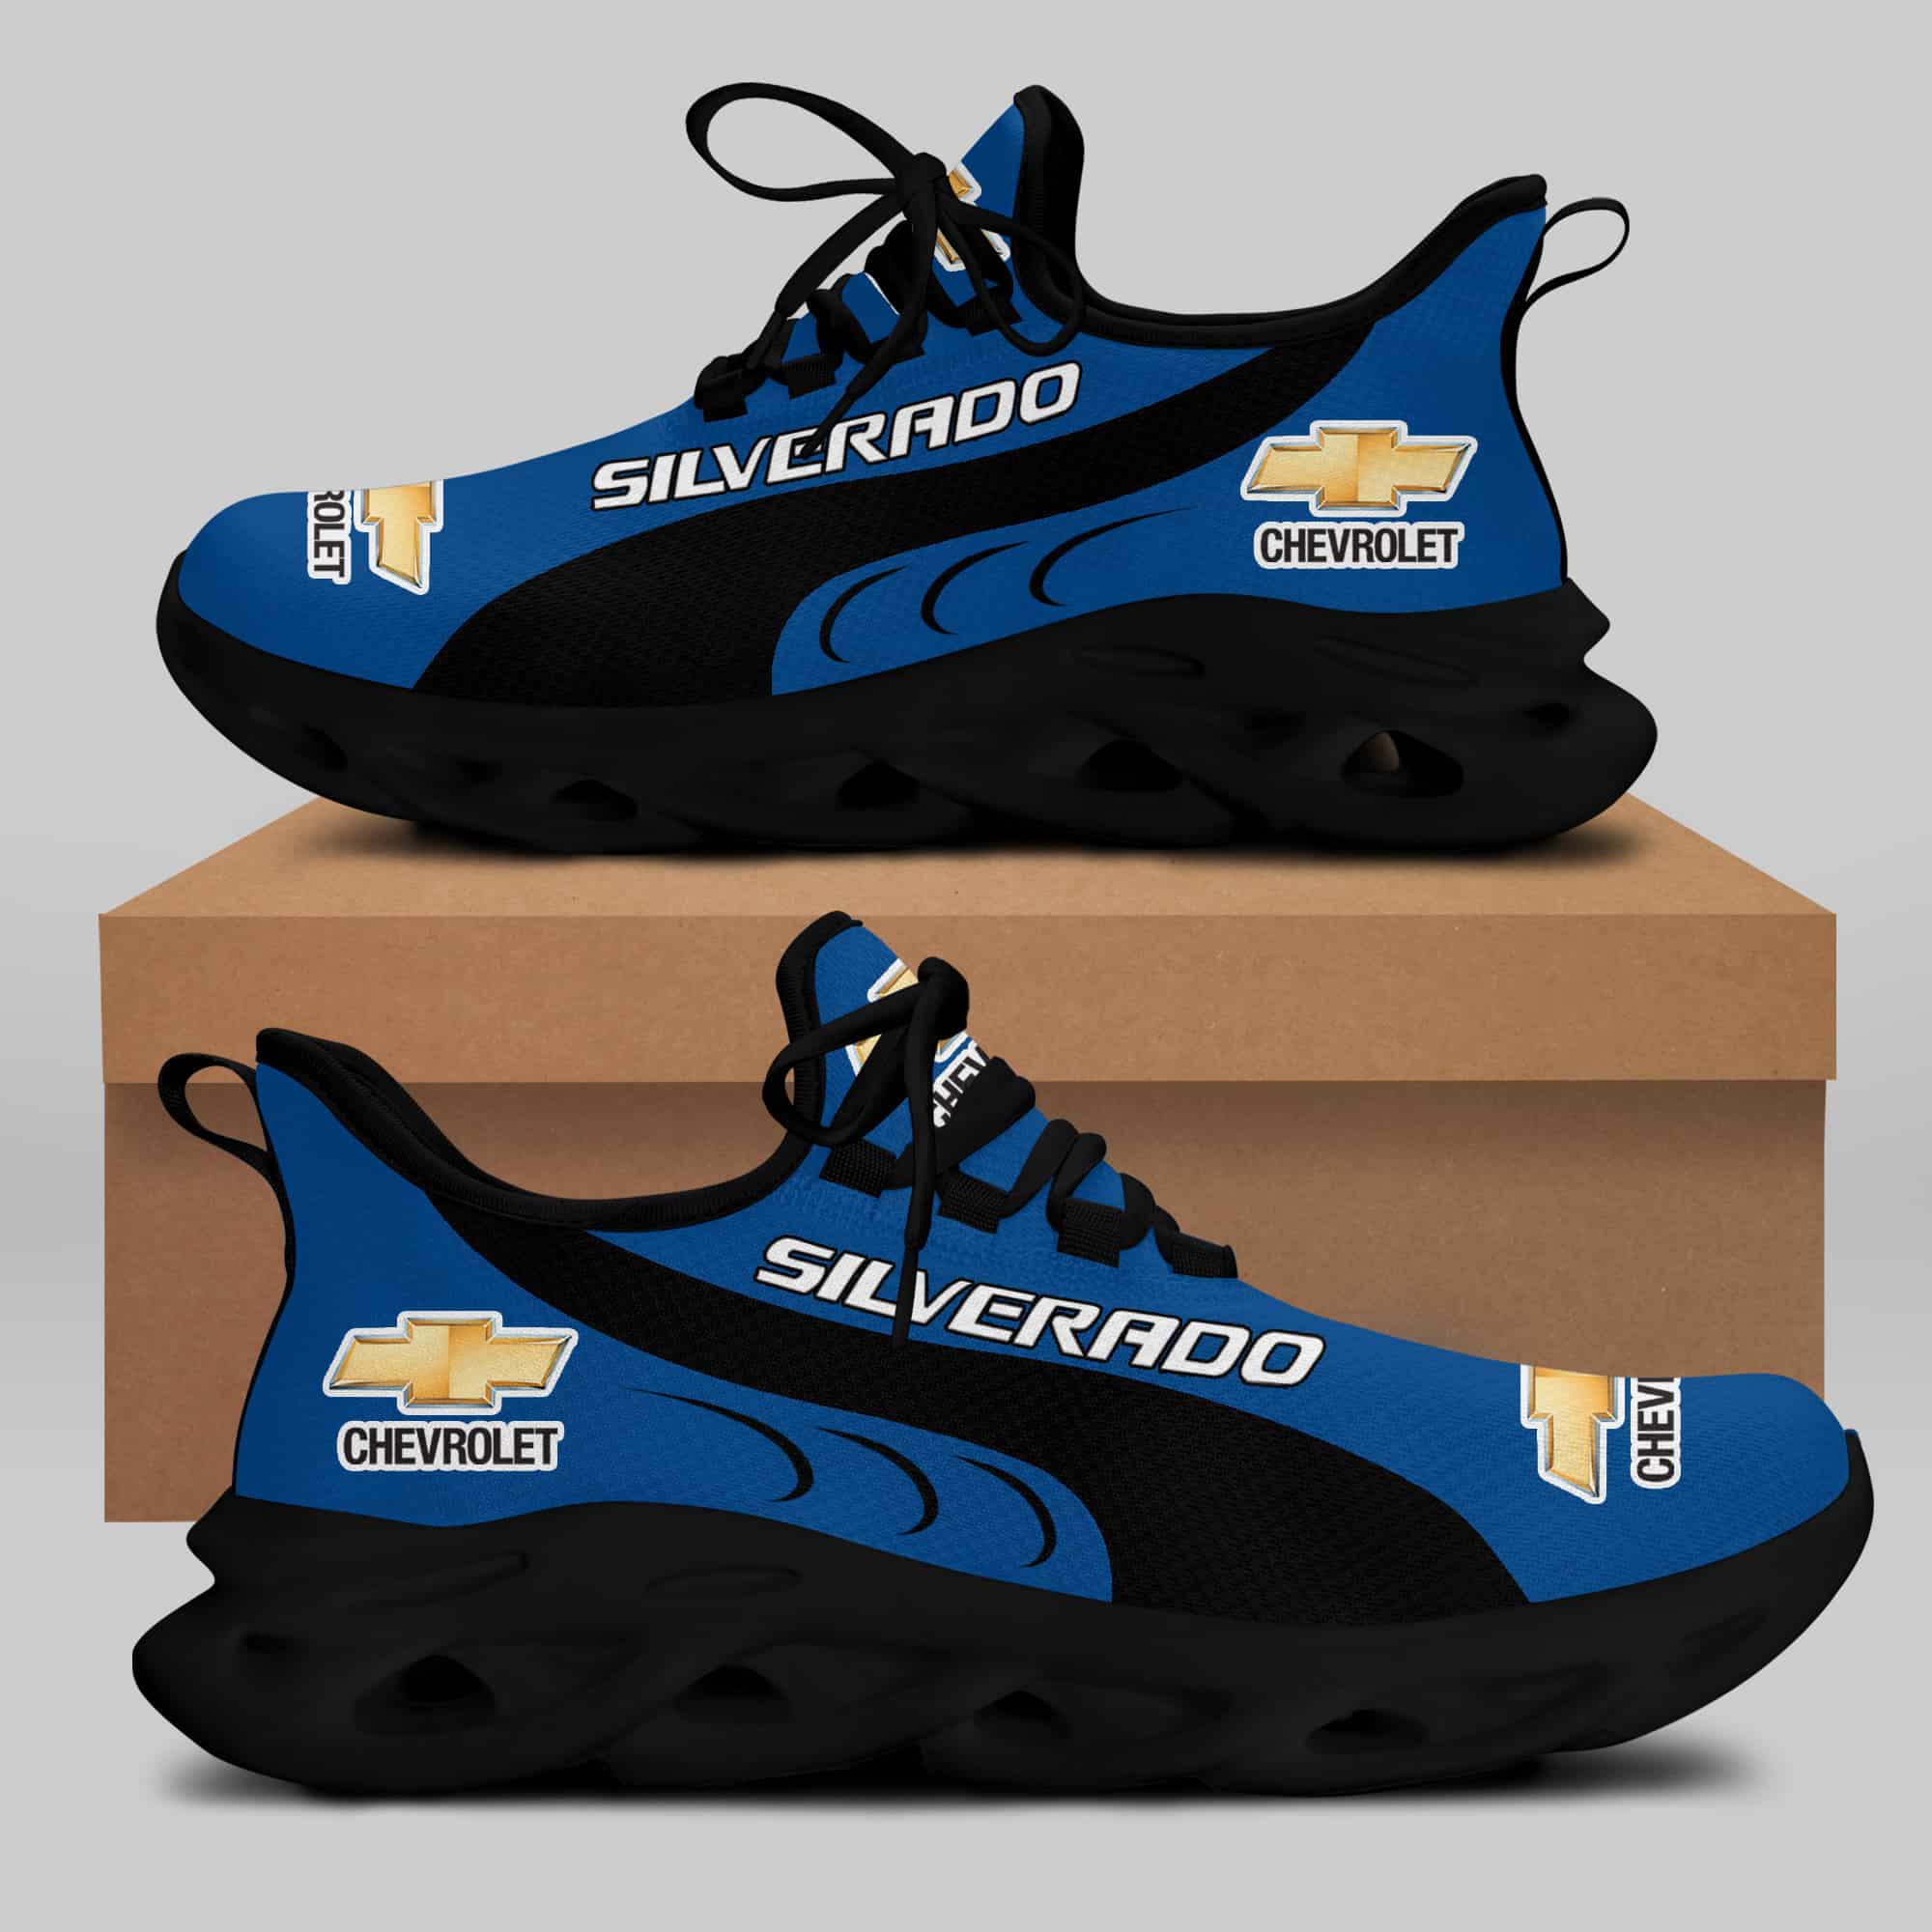 Chevrolet Silverado - Running Shoes Max Soul Shoes Sneakers Ver 6 2